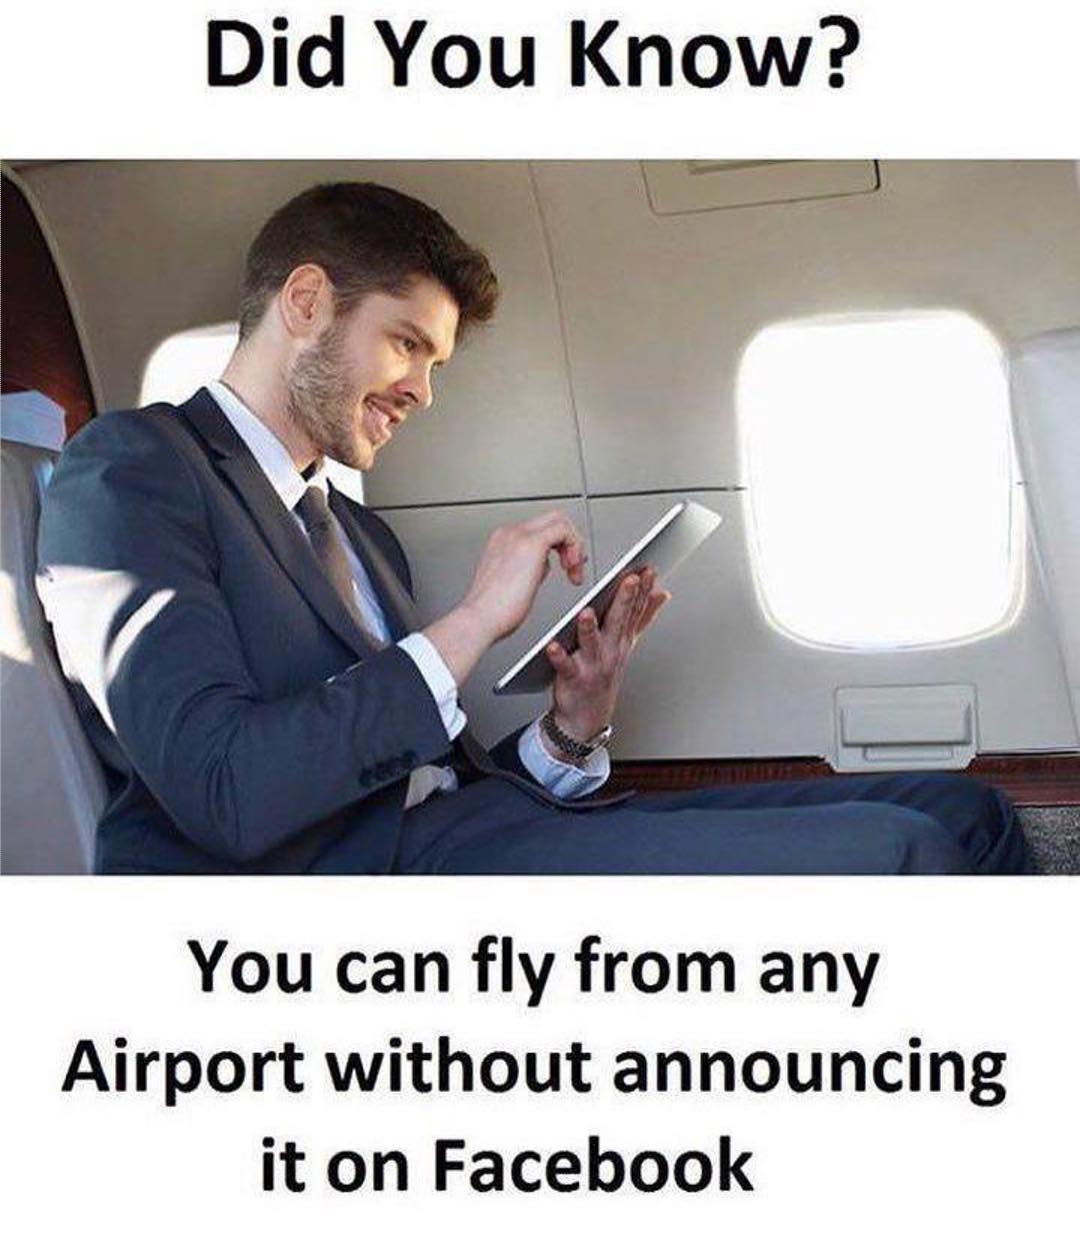 Did You Know? You can fly from any Airport without announcing it on Facebook.